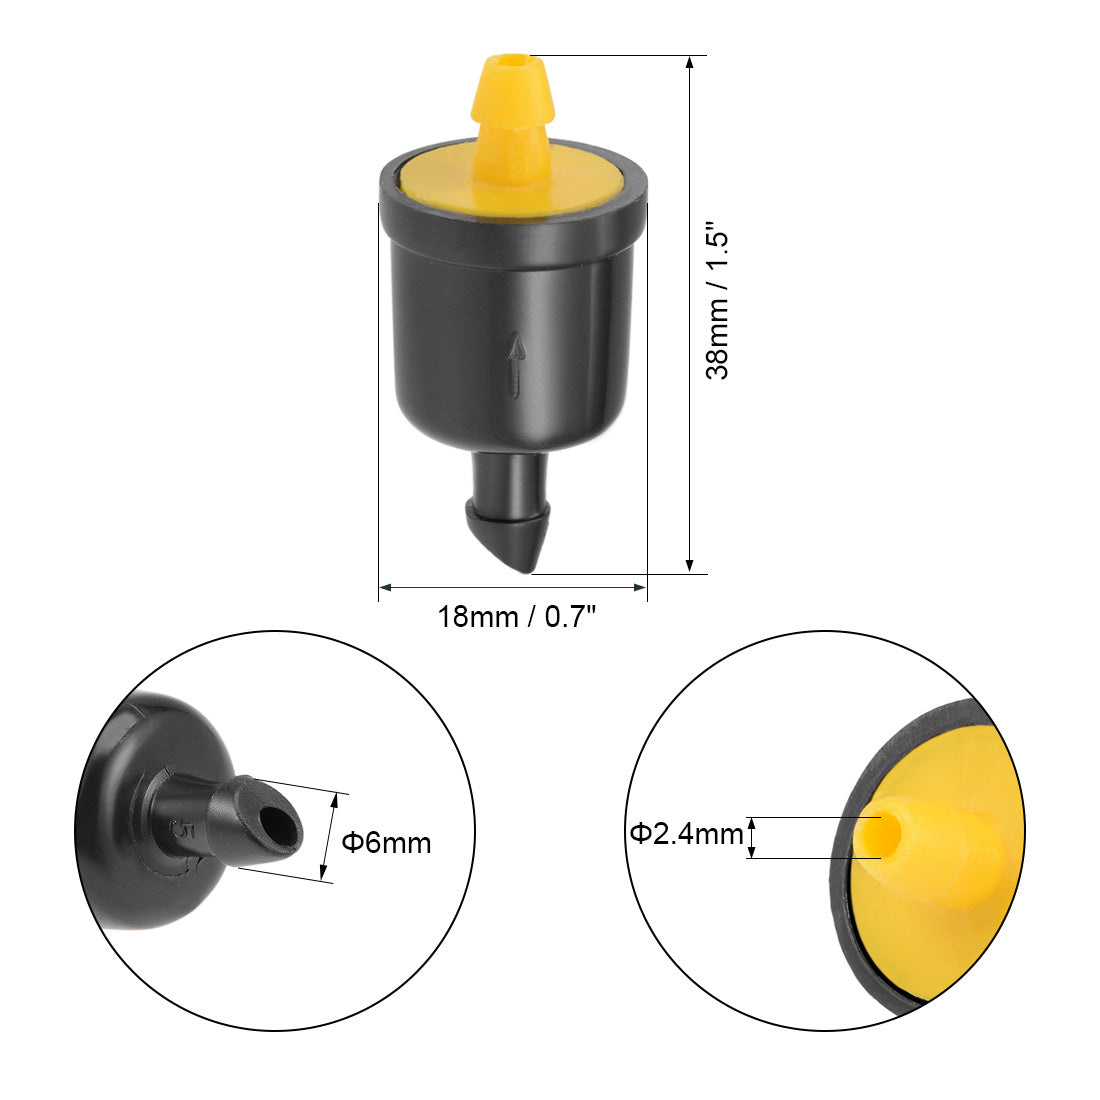 uxcell Uxcell Pressure Compensating Dripper 5 GPH 20L/H Emitter for Garden Lawn Drip Irrigation with Barbed Hose Connector Plastic Yellow 50pcs